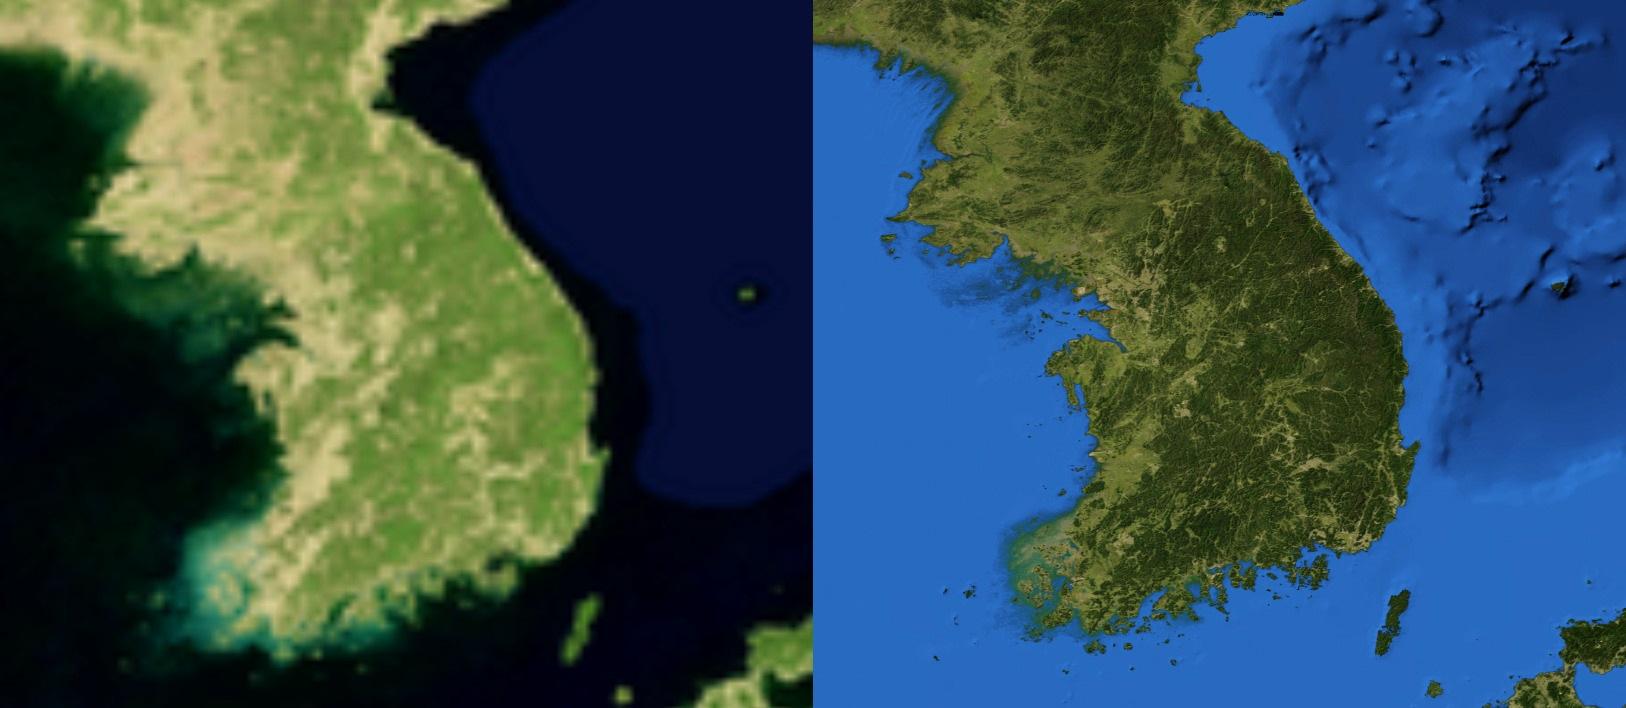 A fixed resolution image of the Korean peninsula (left), and a multi-resolution image of the same region (right).